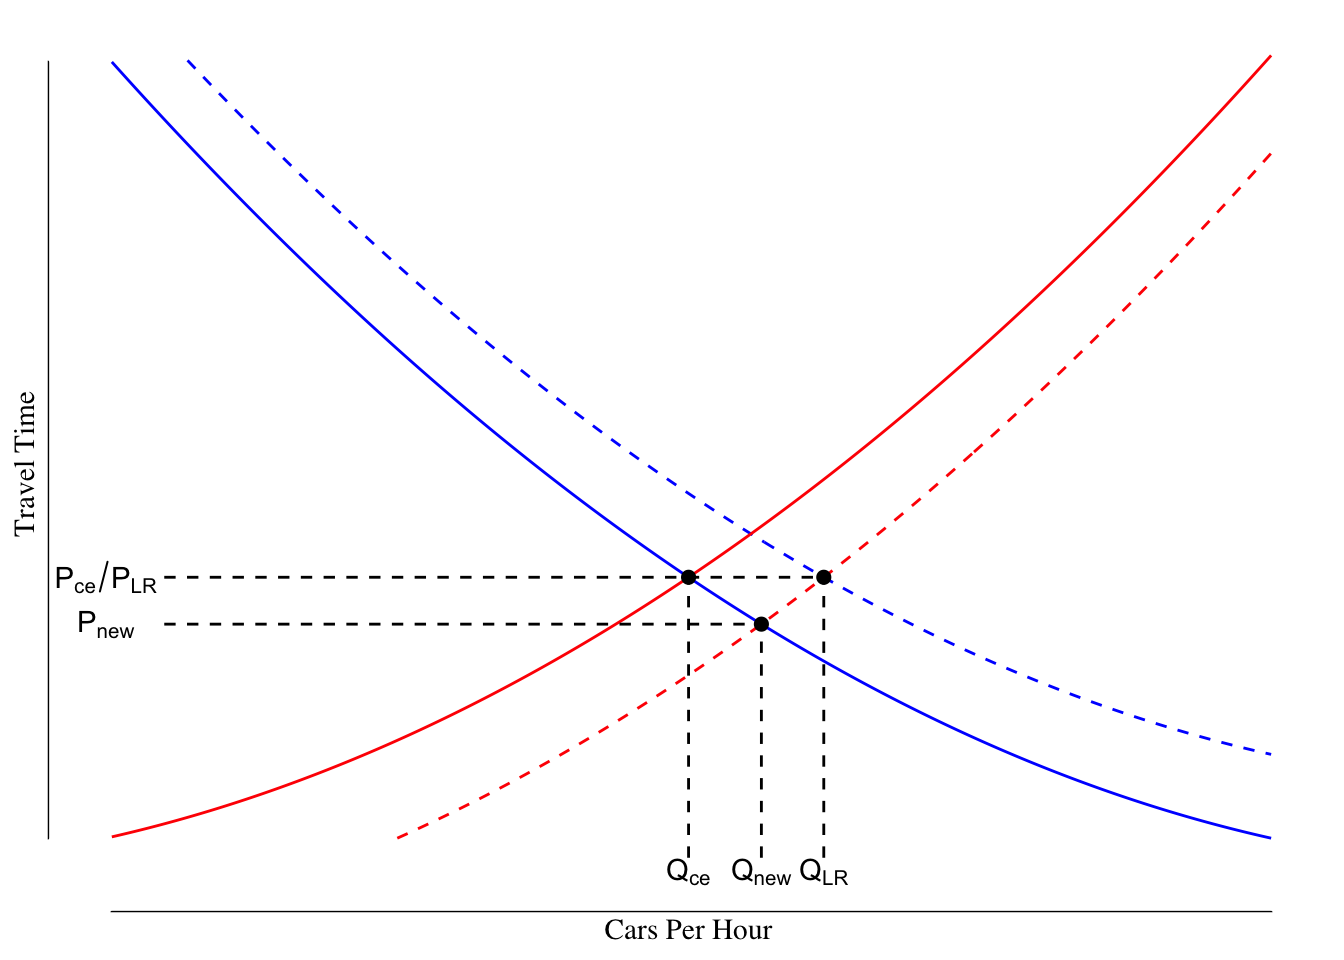 Shift in Demand Curve After Supply Shift Following Road Widening. The solid lines are the supply (red) and demand (blue) curves before the road widening while the dashed lines are the supply and demand curves after the road widening and the market settles.